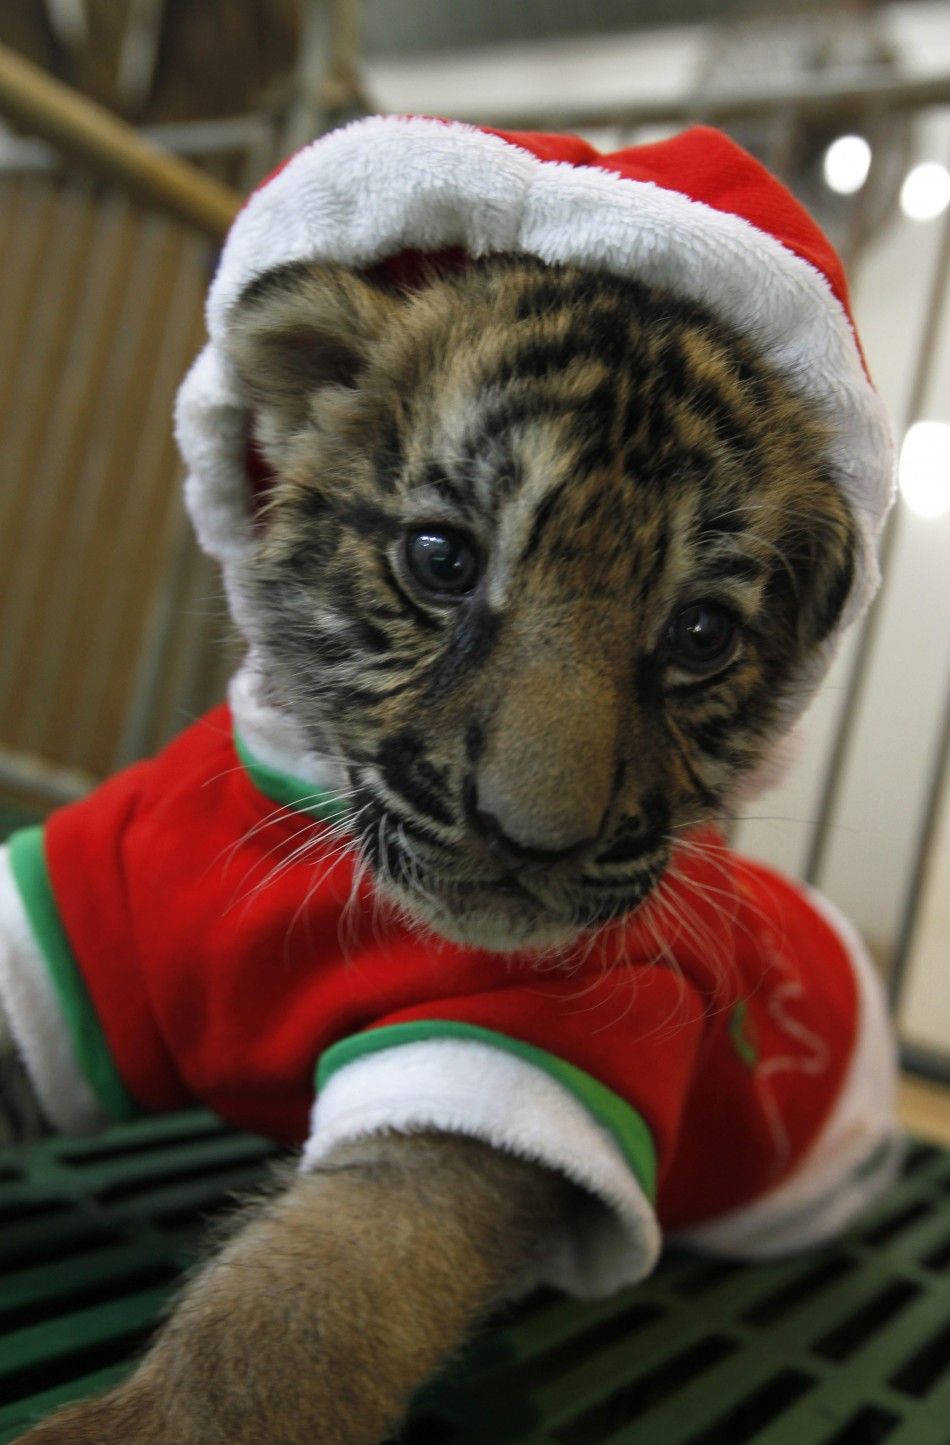 A tiger cub dressed as Santa Claus is seen on Christmas Eve at the Sriracha Tiger Zoo in Thailands Chonburi province 